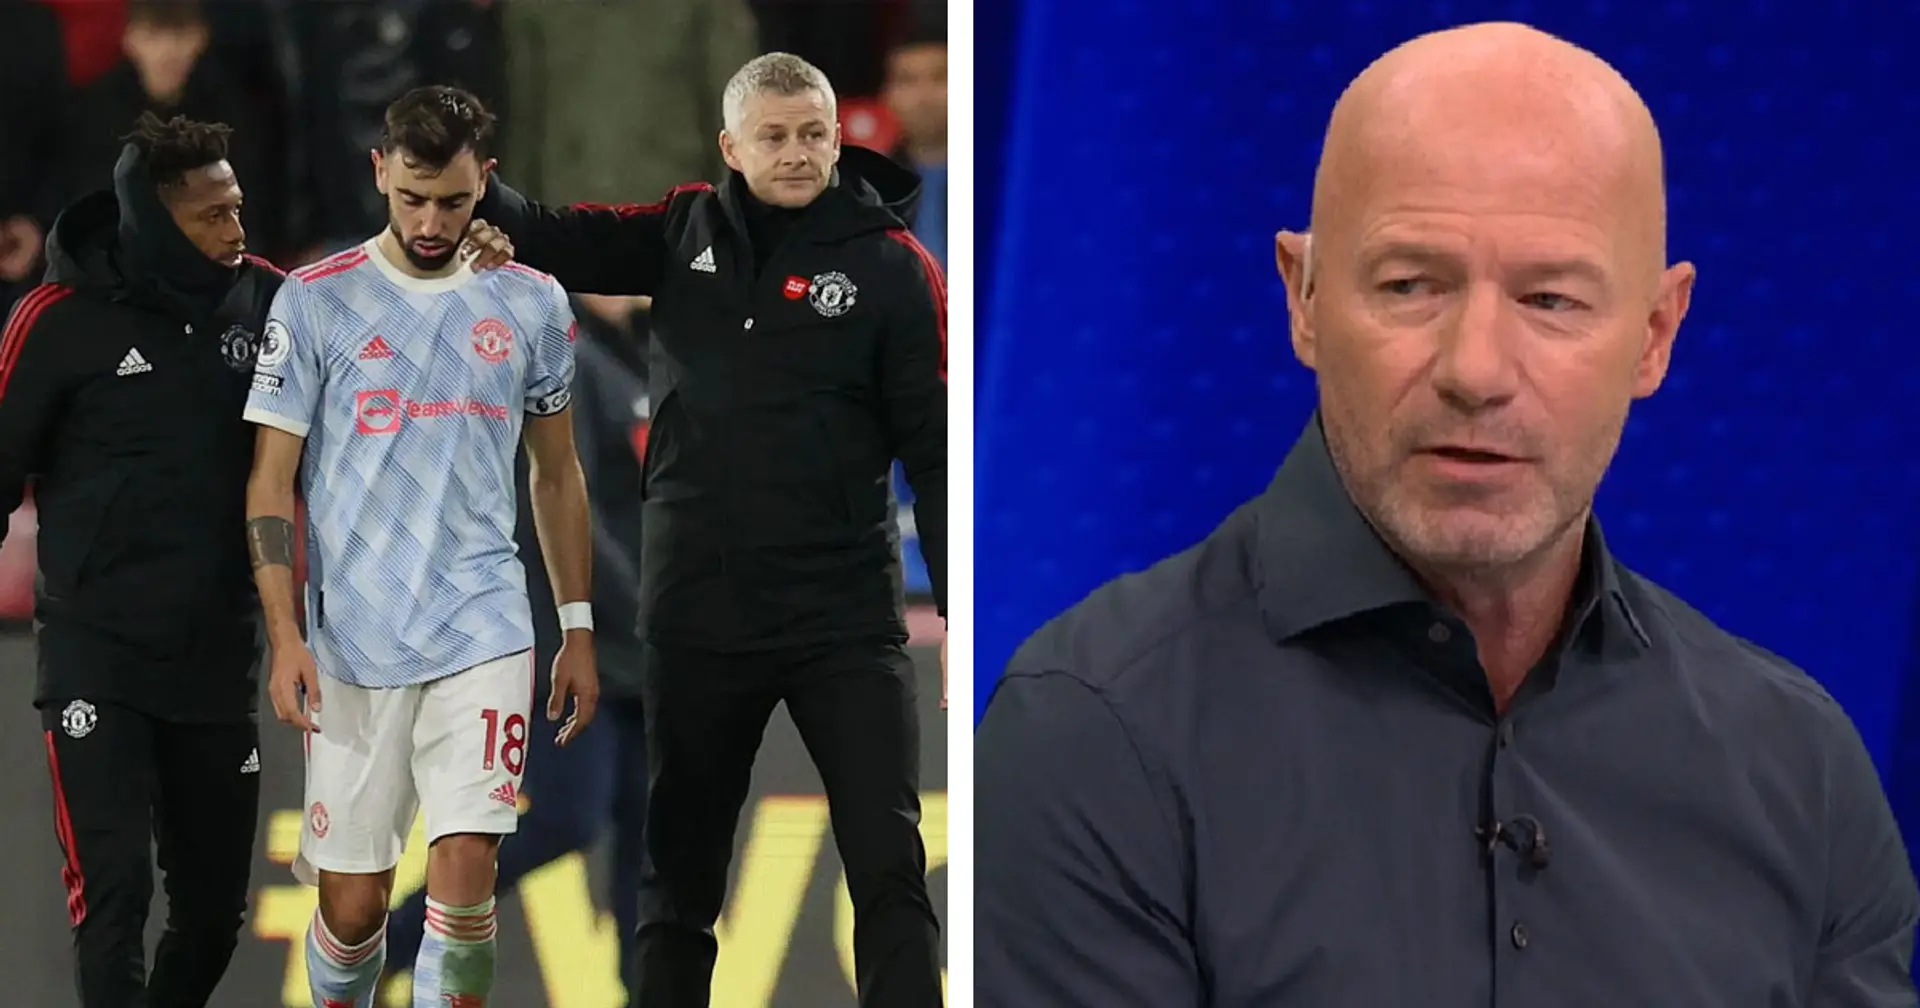 Alan Shearer: ‘United players lost respect for Solskjaer. They don't want him as manager'